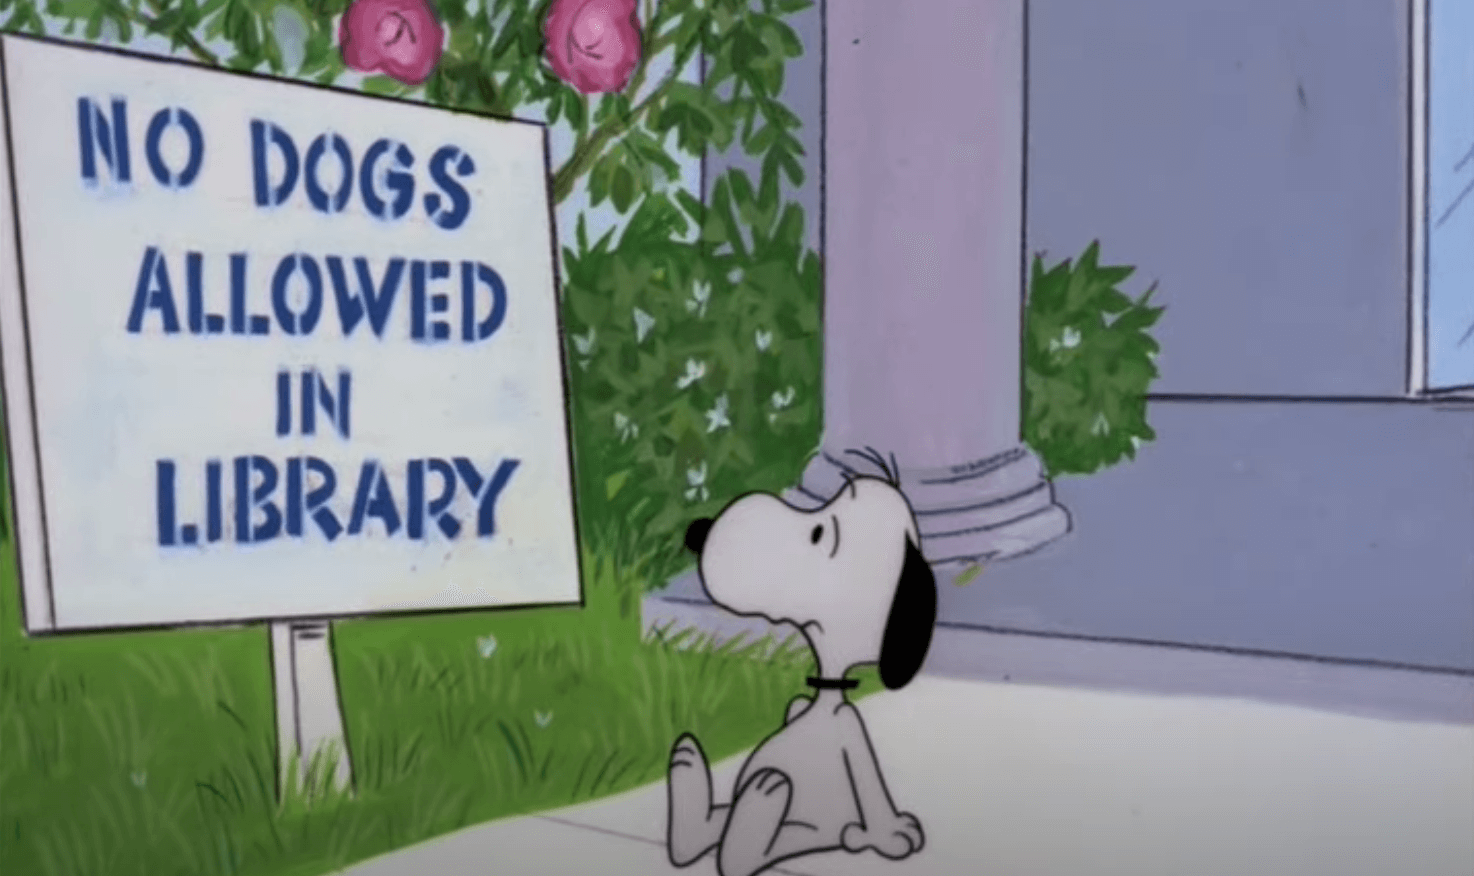 Snoopy looks at No Dogs Allowed in Library sign